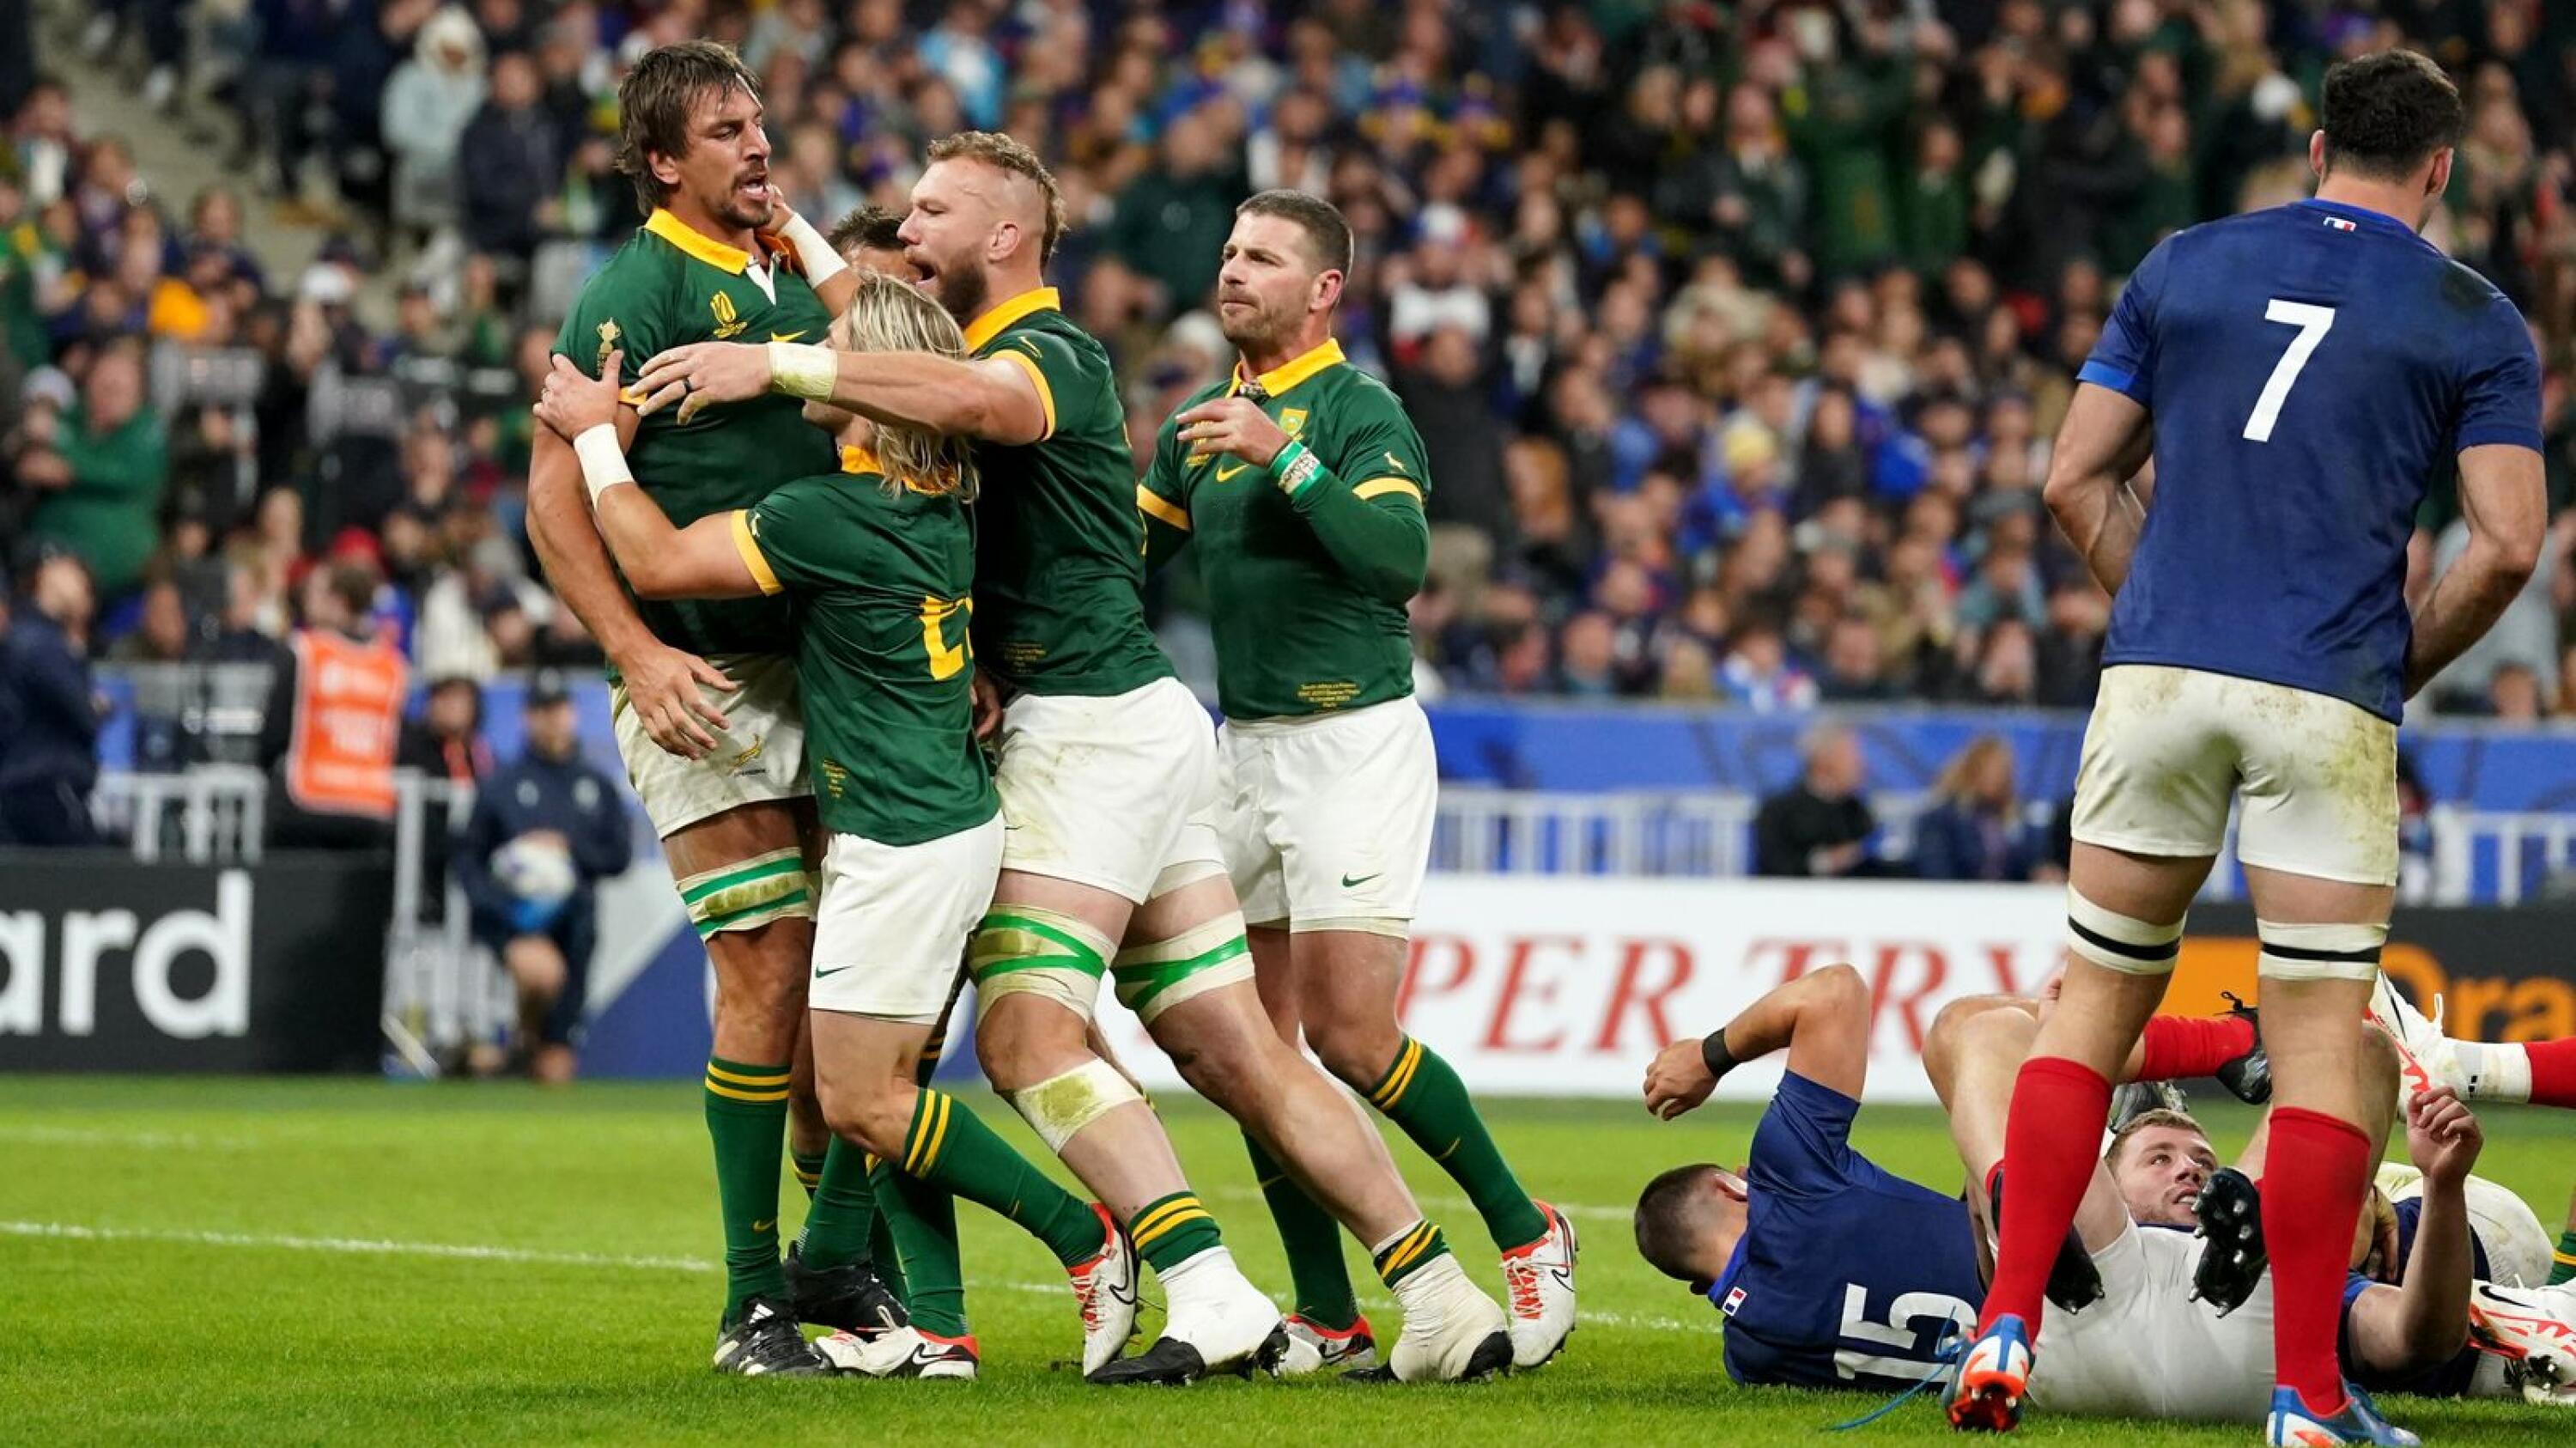 Eben Etzebeth celebrates with his teammates after scoring their fourth try against France in the Rugby World Cup quarter-finals.